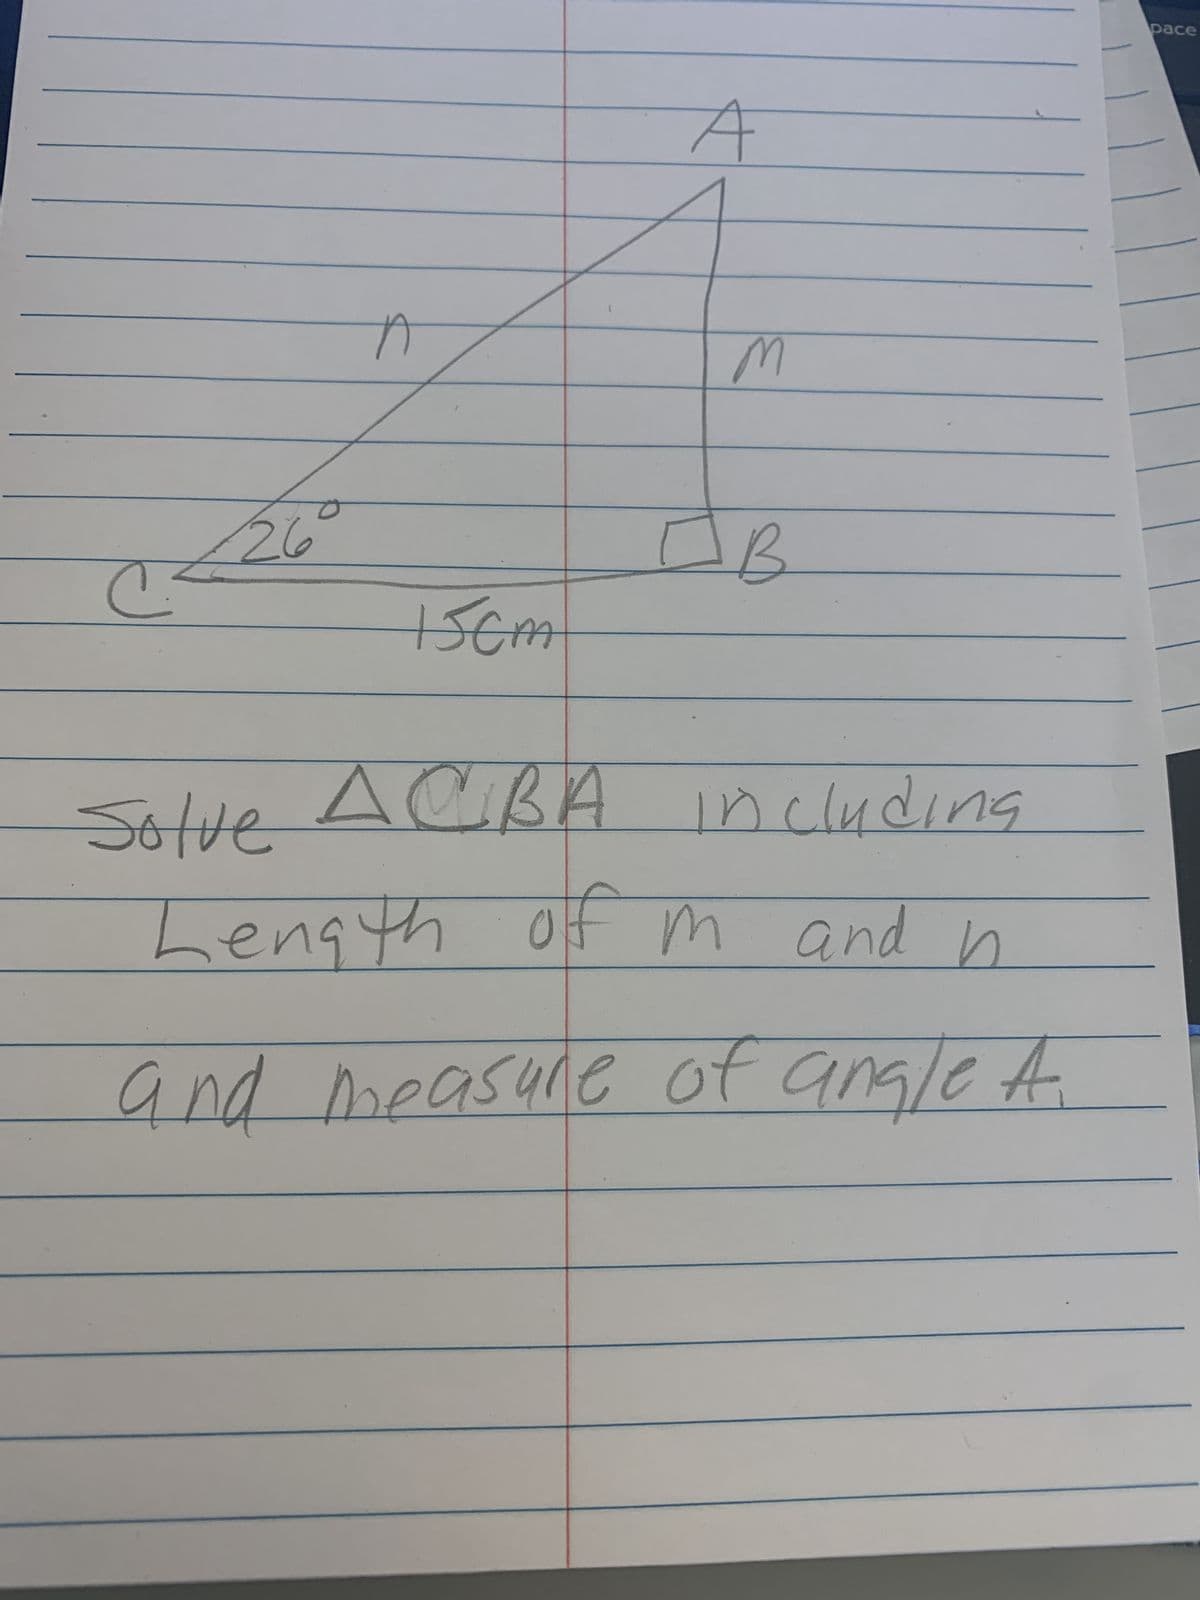 C (²
26
A
15cm
A
M
B
Solve ACIBA including
Length of m and n
and measure of angle A.
pace